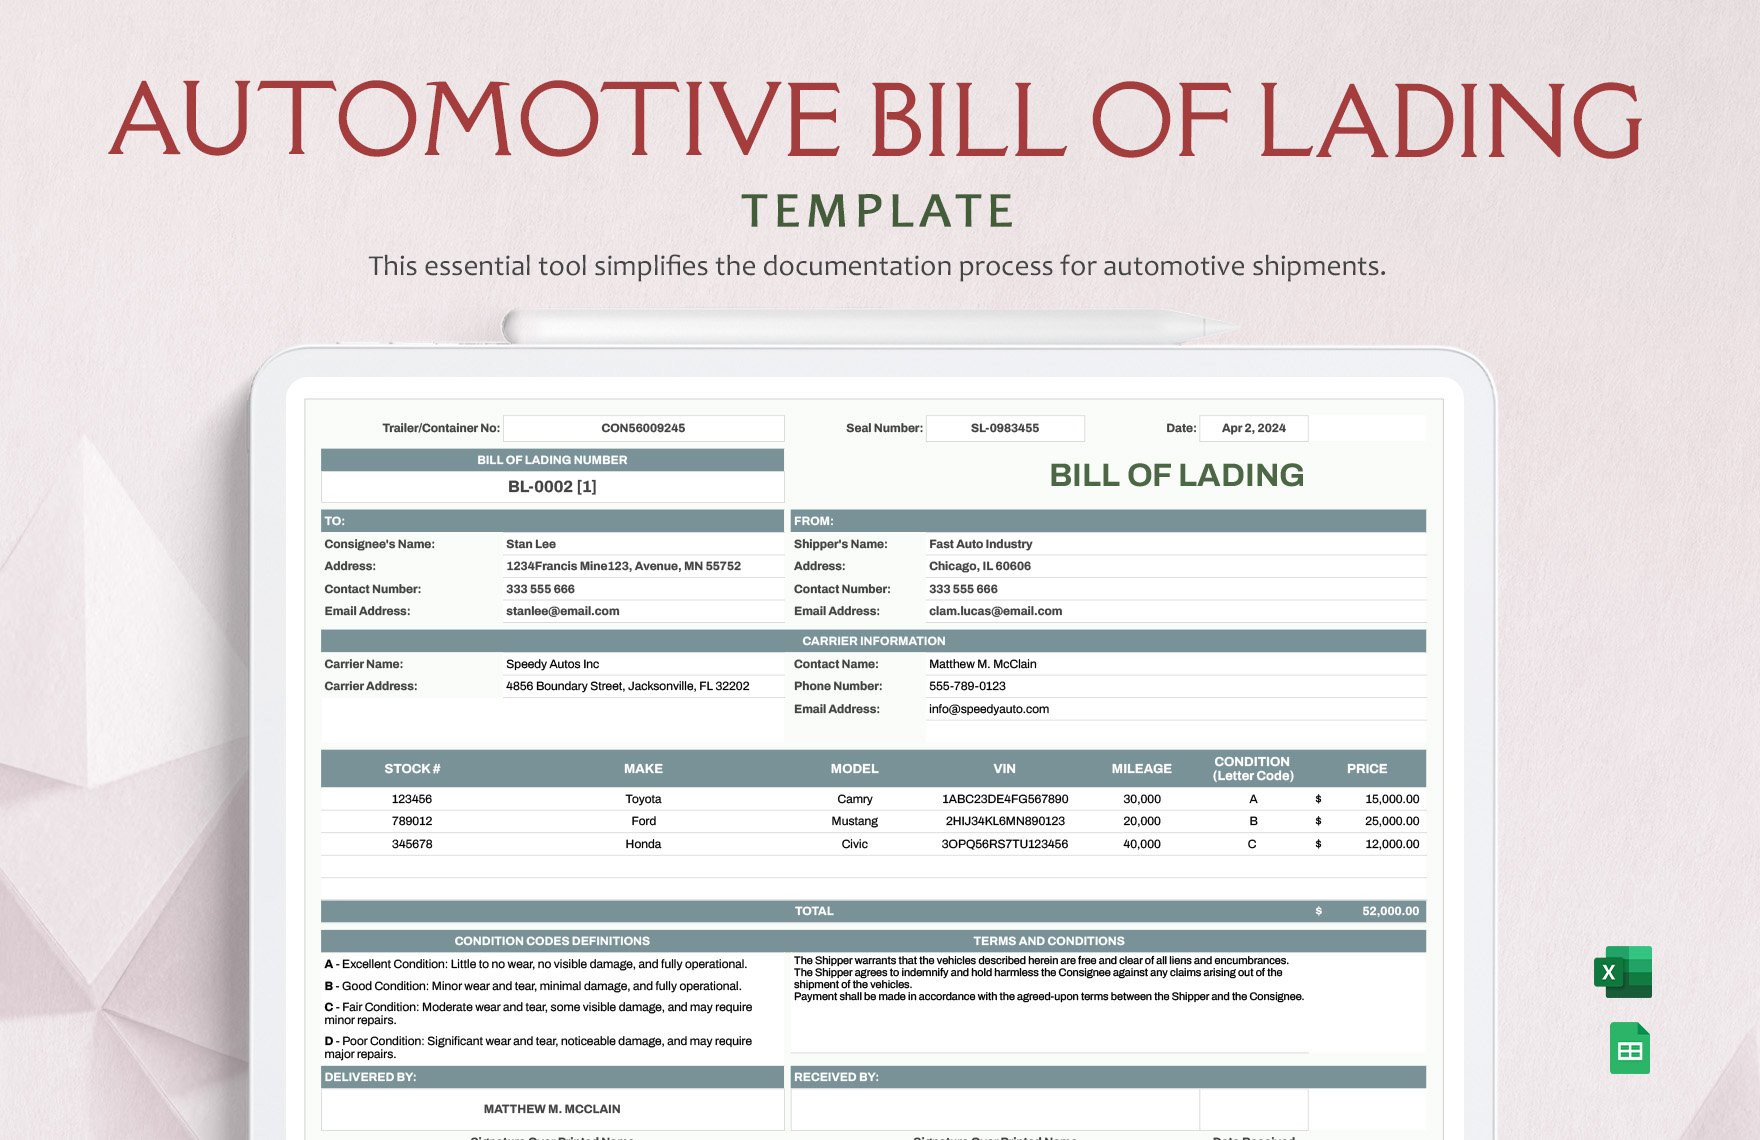 Automotive Bill of Lading Template in Excel, Google Sheets